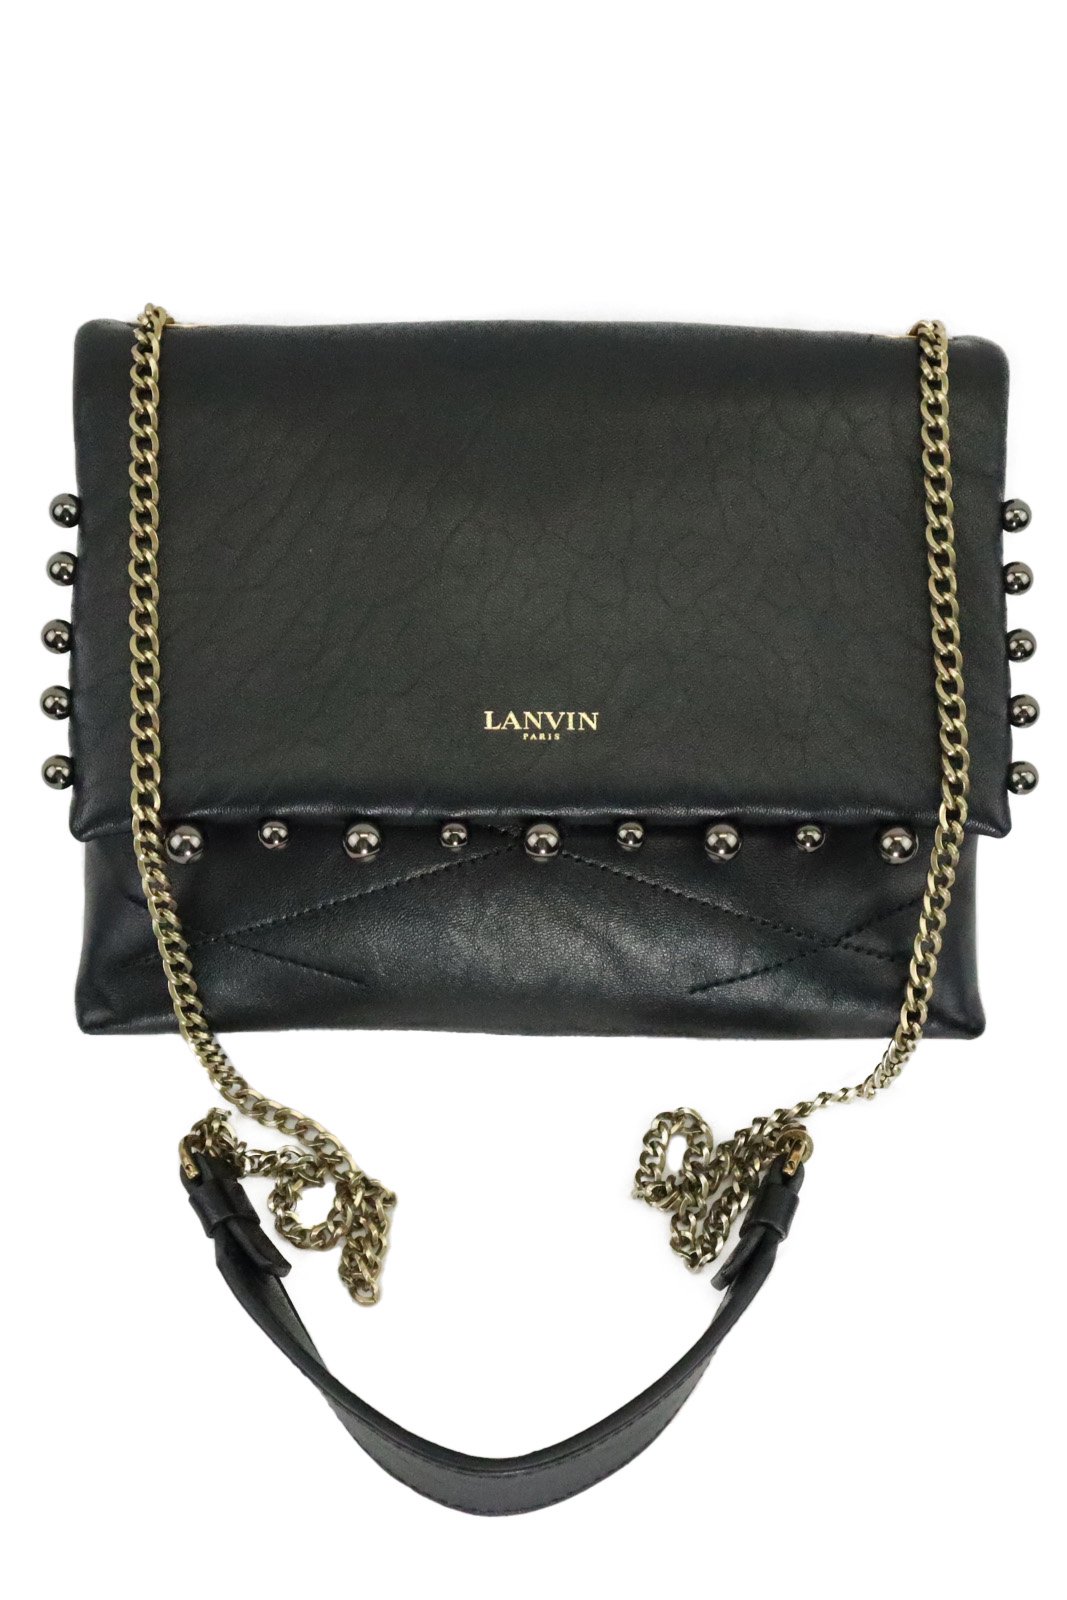 30%OFFLANVIN Leather bag